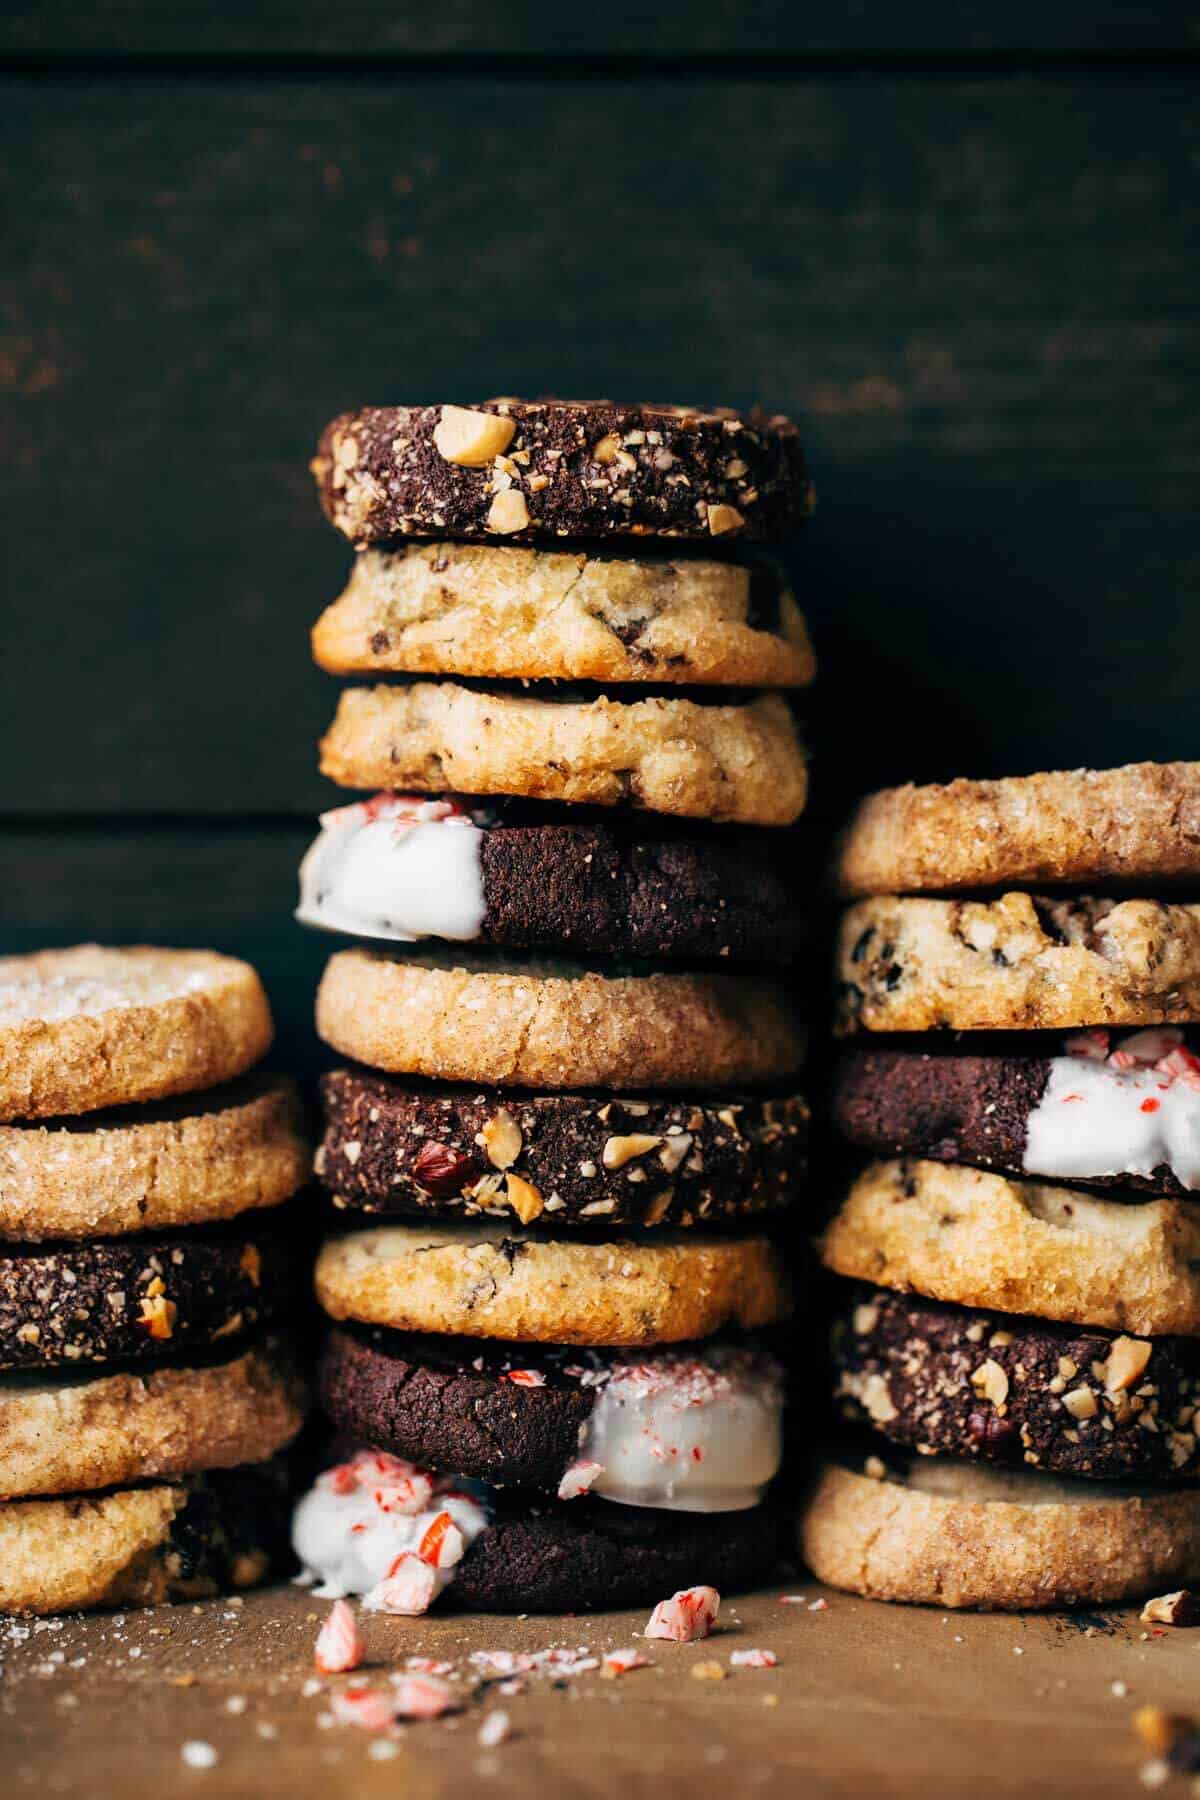 https://butternutbakeryblog.com/wp-content/uploads/2020/12/stacked-slice-and-bake-cookies.jpg